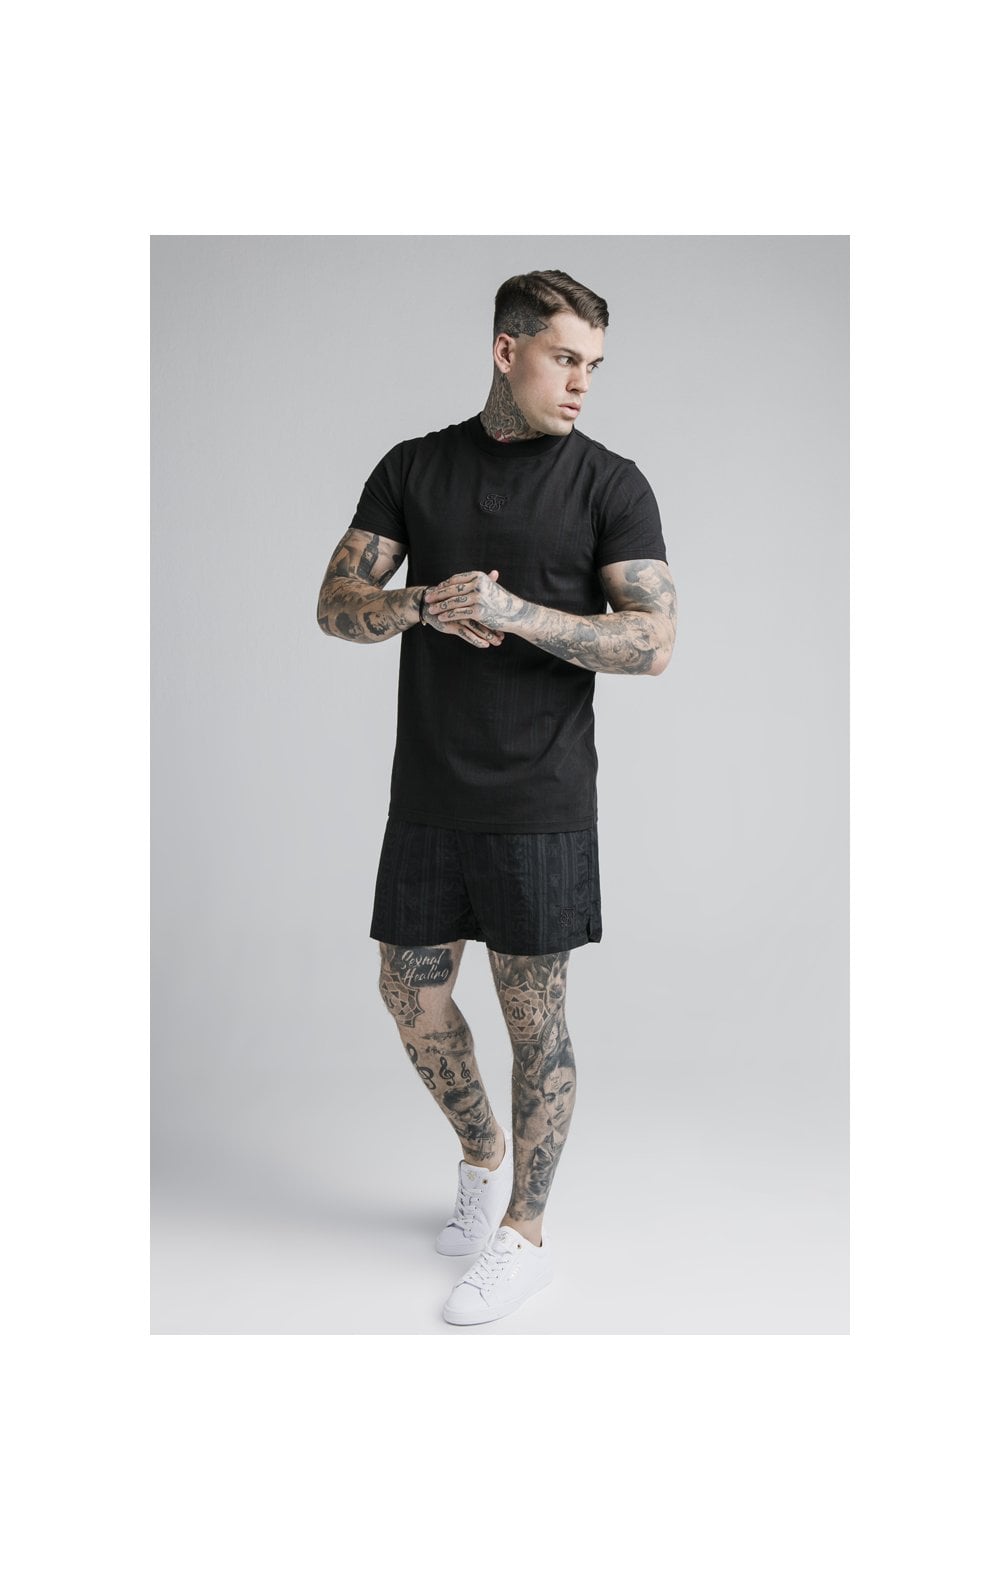 SikSilk S/S Fitted Box Tee - Black & Grey (4)